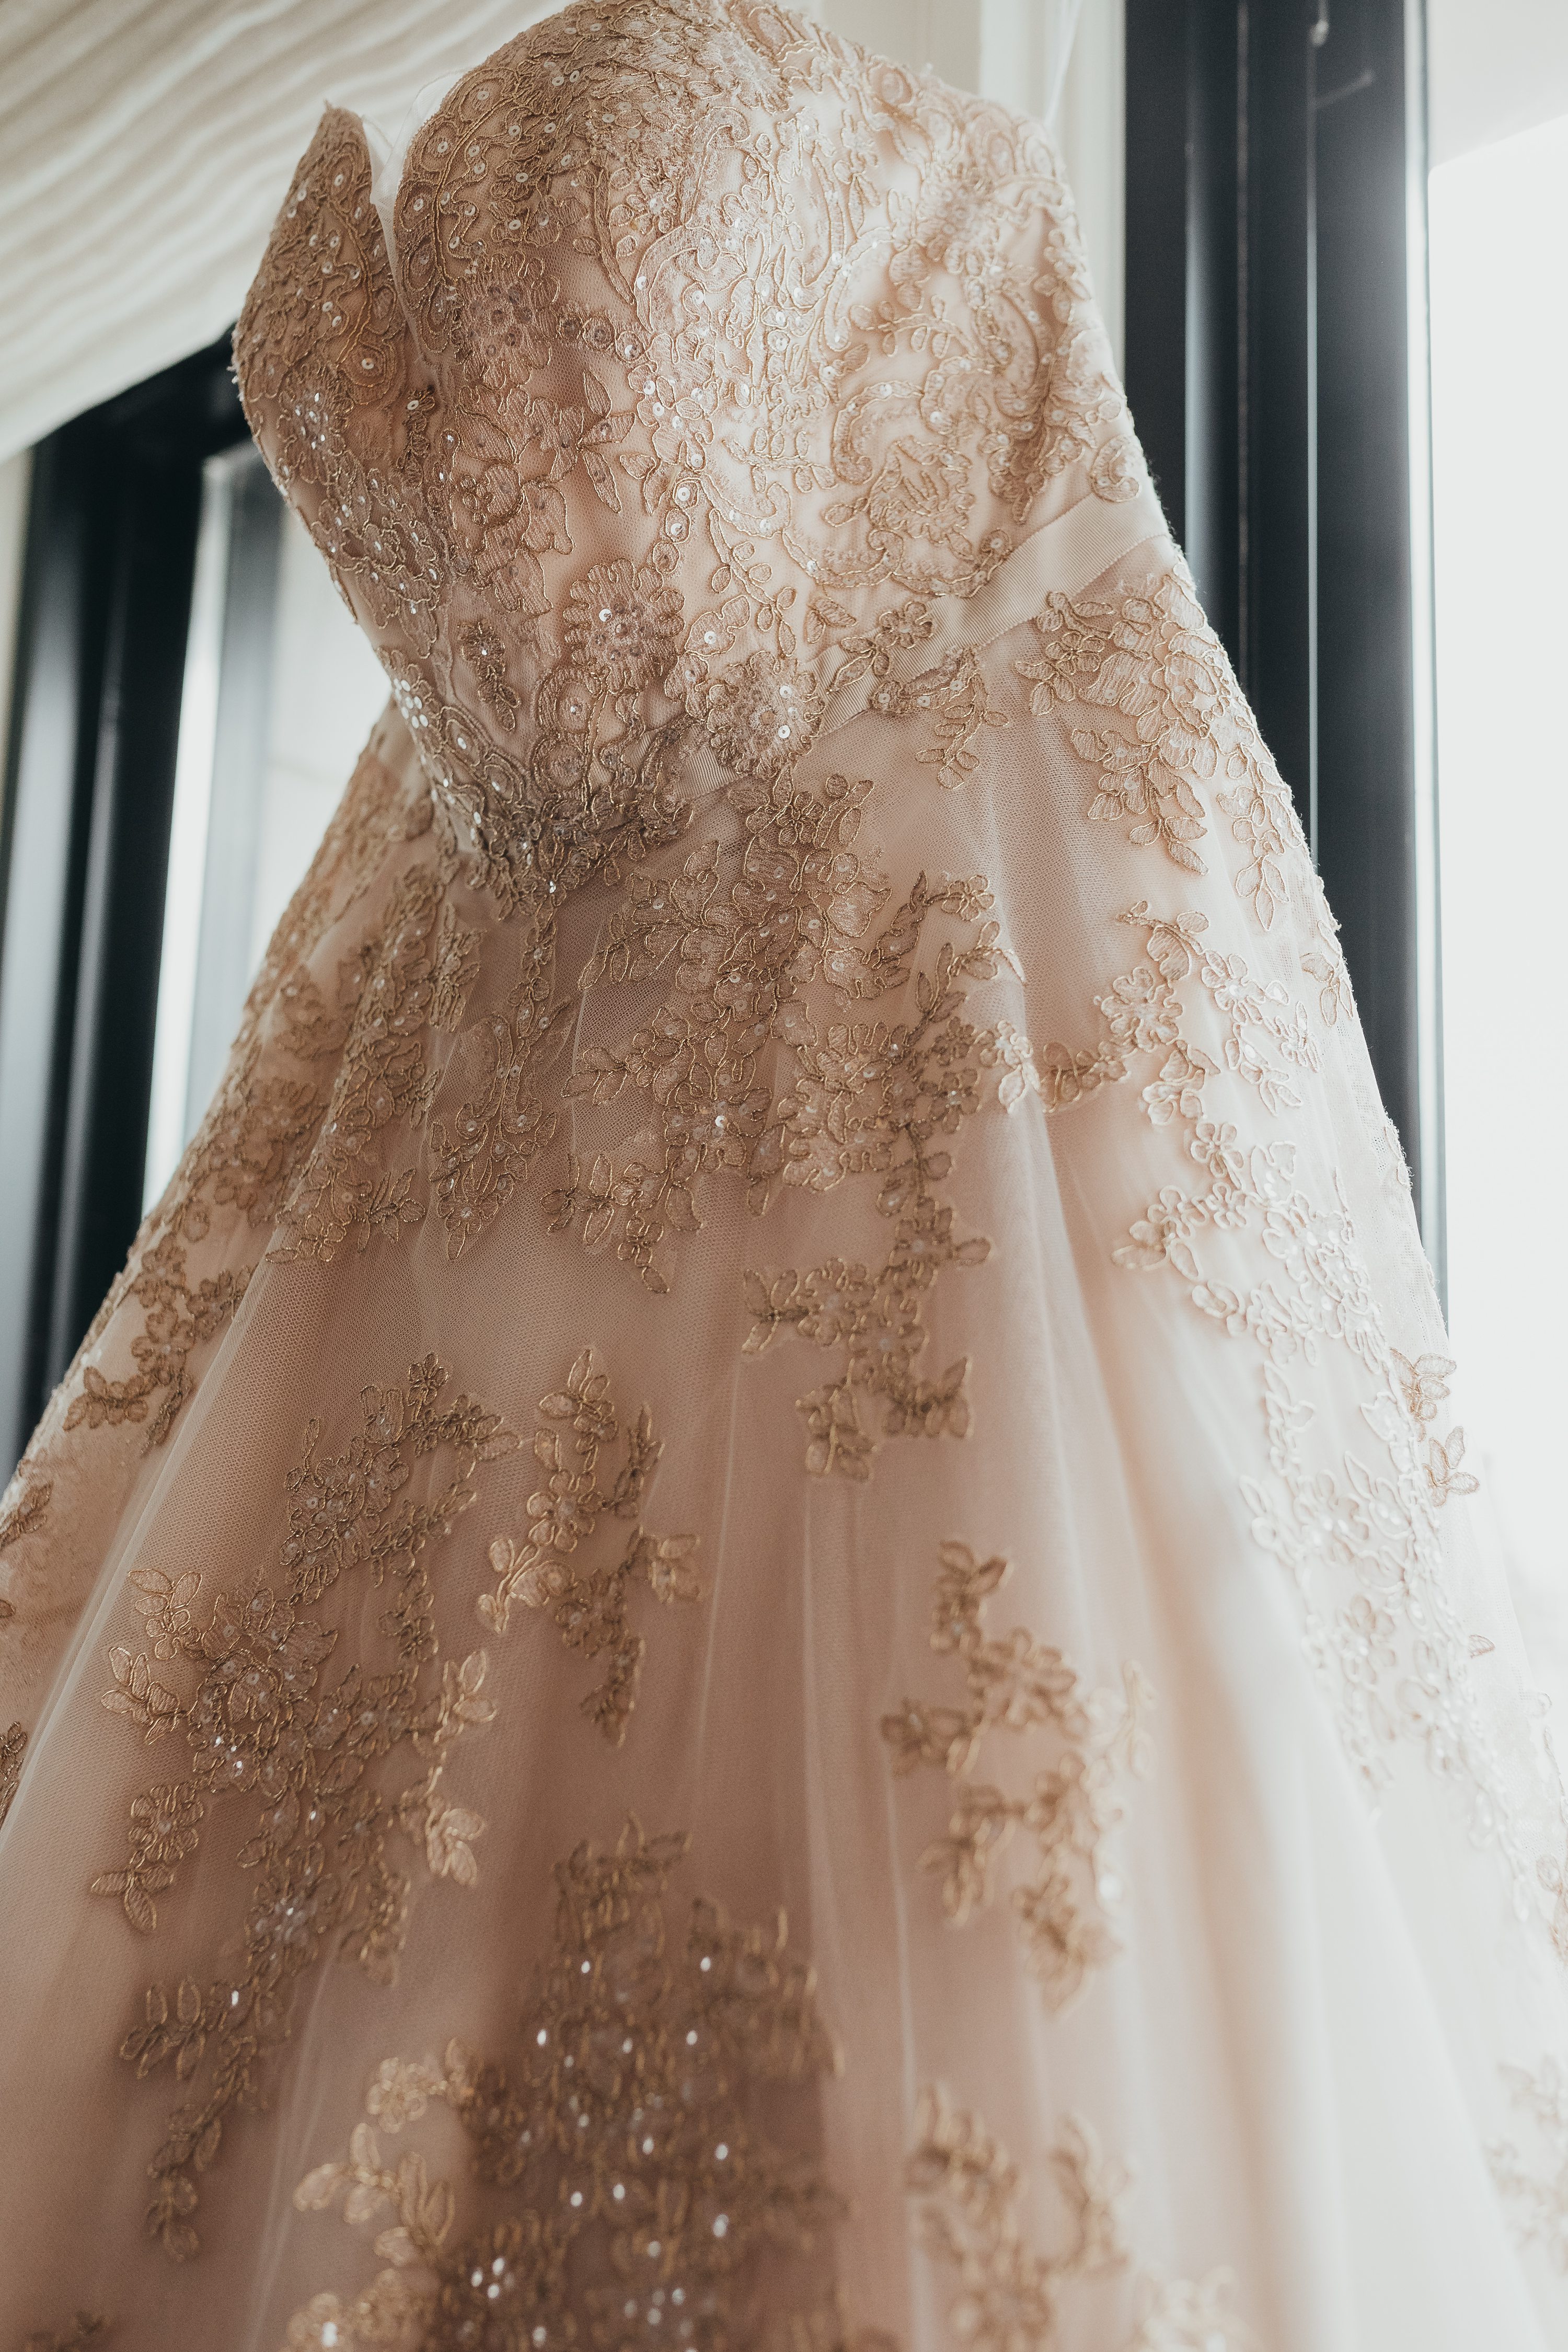 2020 covid wedding,pandemic wedding,oleg cassini,rose gold dress with embroidery